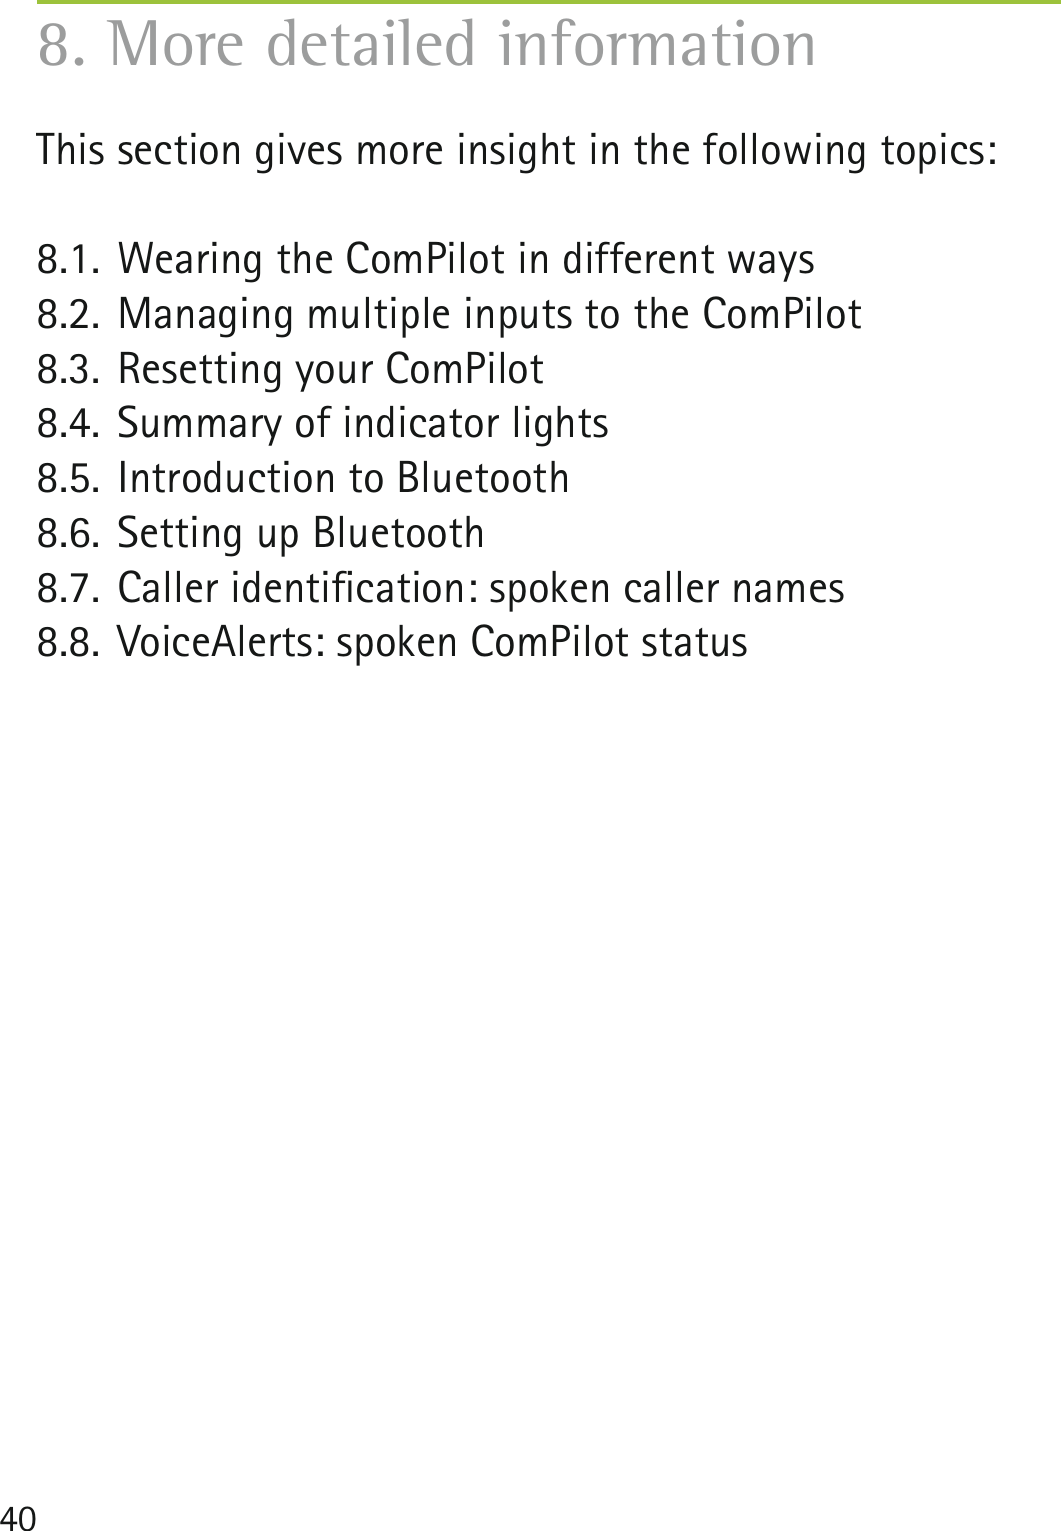 40This section gives more insight in the following topics:8.1. Wearing the ComPilot in different ways8.2. Managing multiple inputs to the ComPilot8.3. Resetting your ComPilot8.4. Summary of indicator lights8.5. Introduction to Bluetooth8.6. Setting up Bluetooth8.7. Caller identiﬁcation: spoken caller names8.8. VoiceAlerts: spoken ComPilot status8. More detailed information